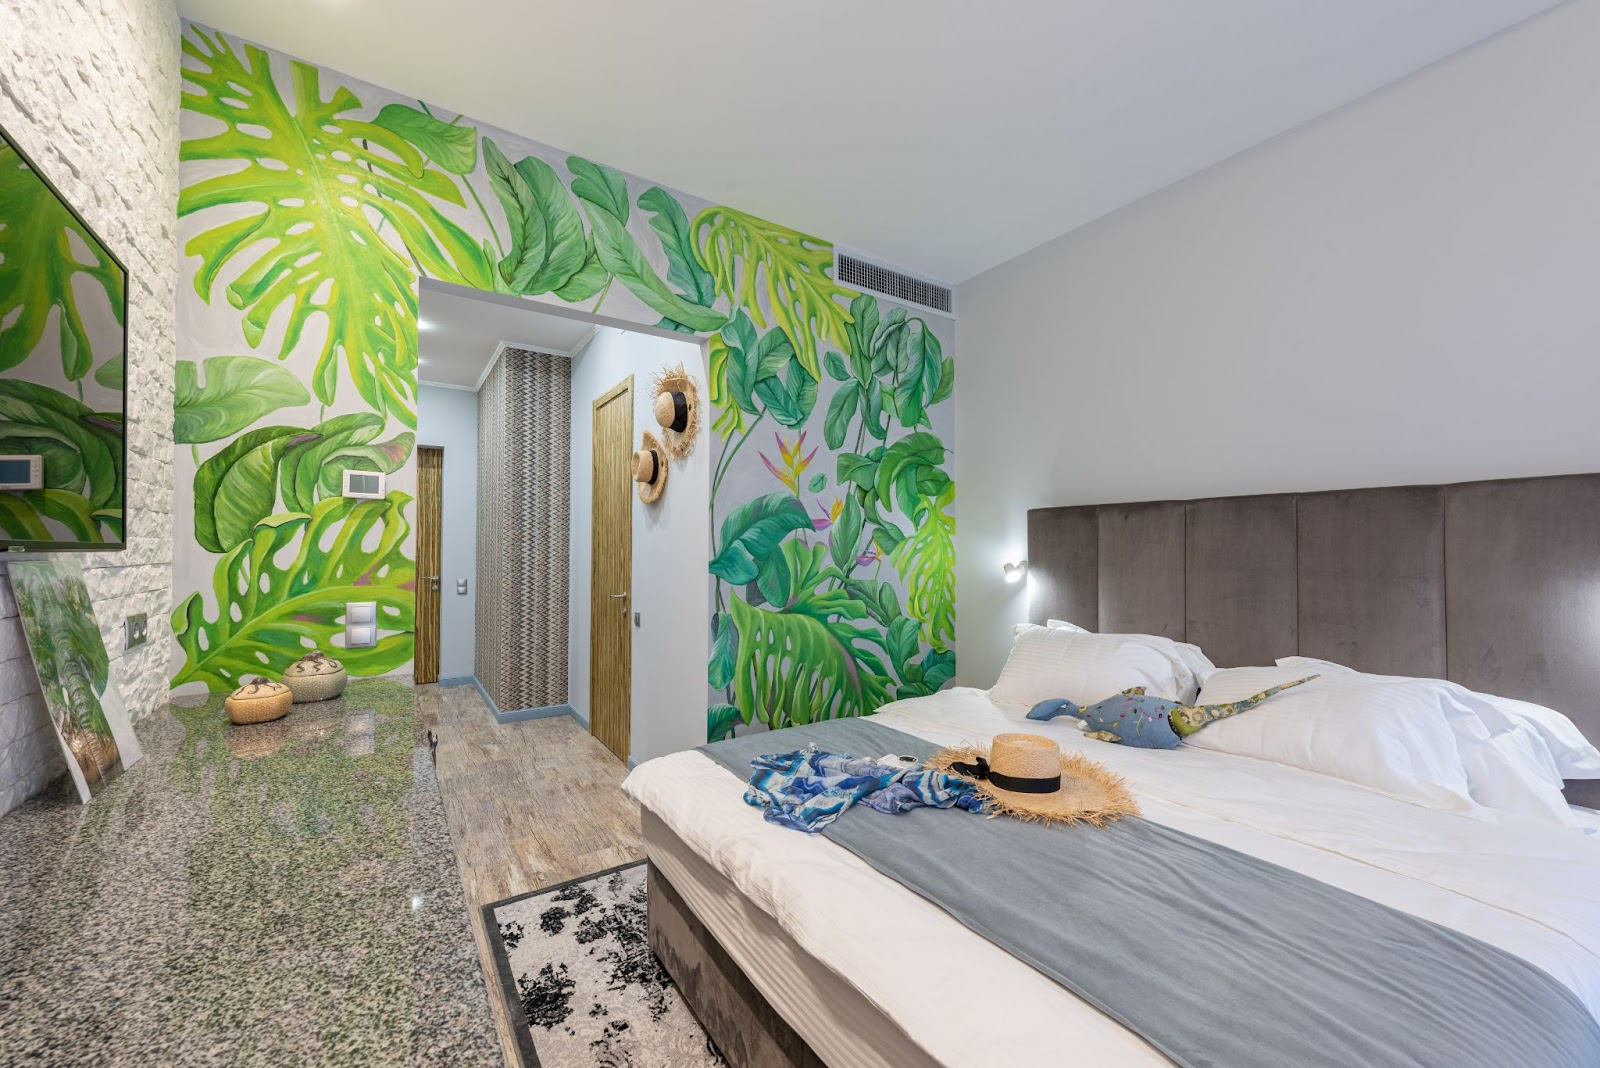 Bold wallpaper design full of greenery on one wall of the bedroom